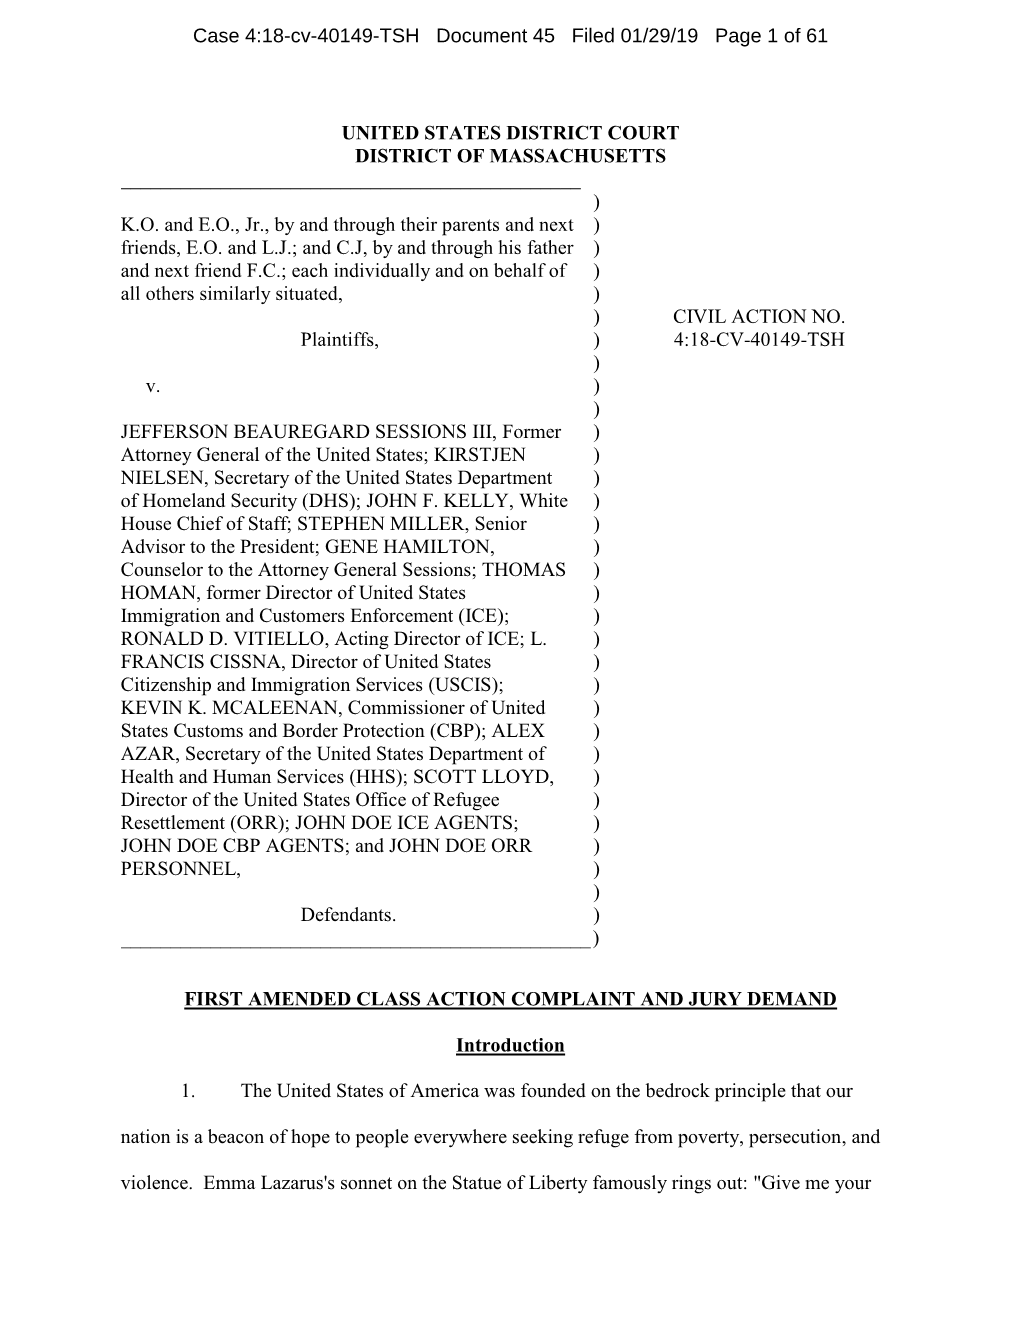 Case 4:18-Cv-40149-TSH Document 45 Filed 01/29/19 Page 1 of 61